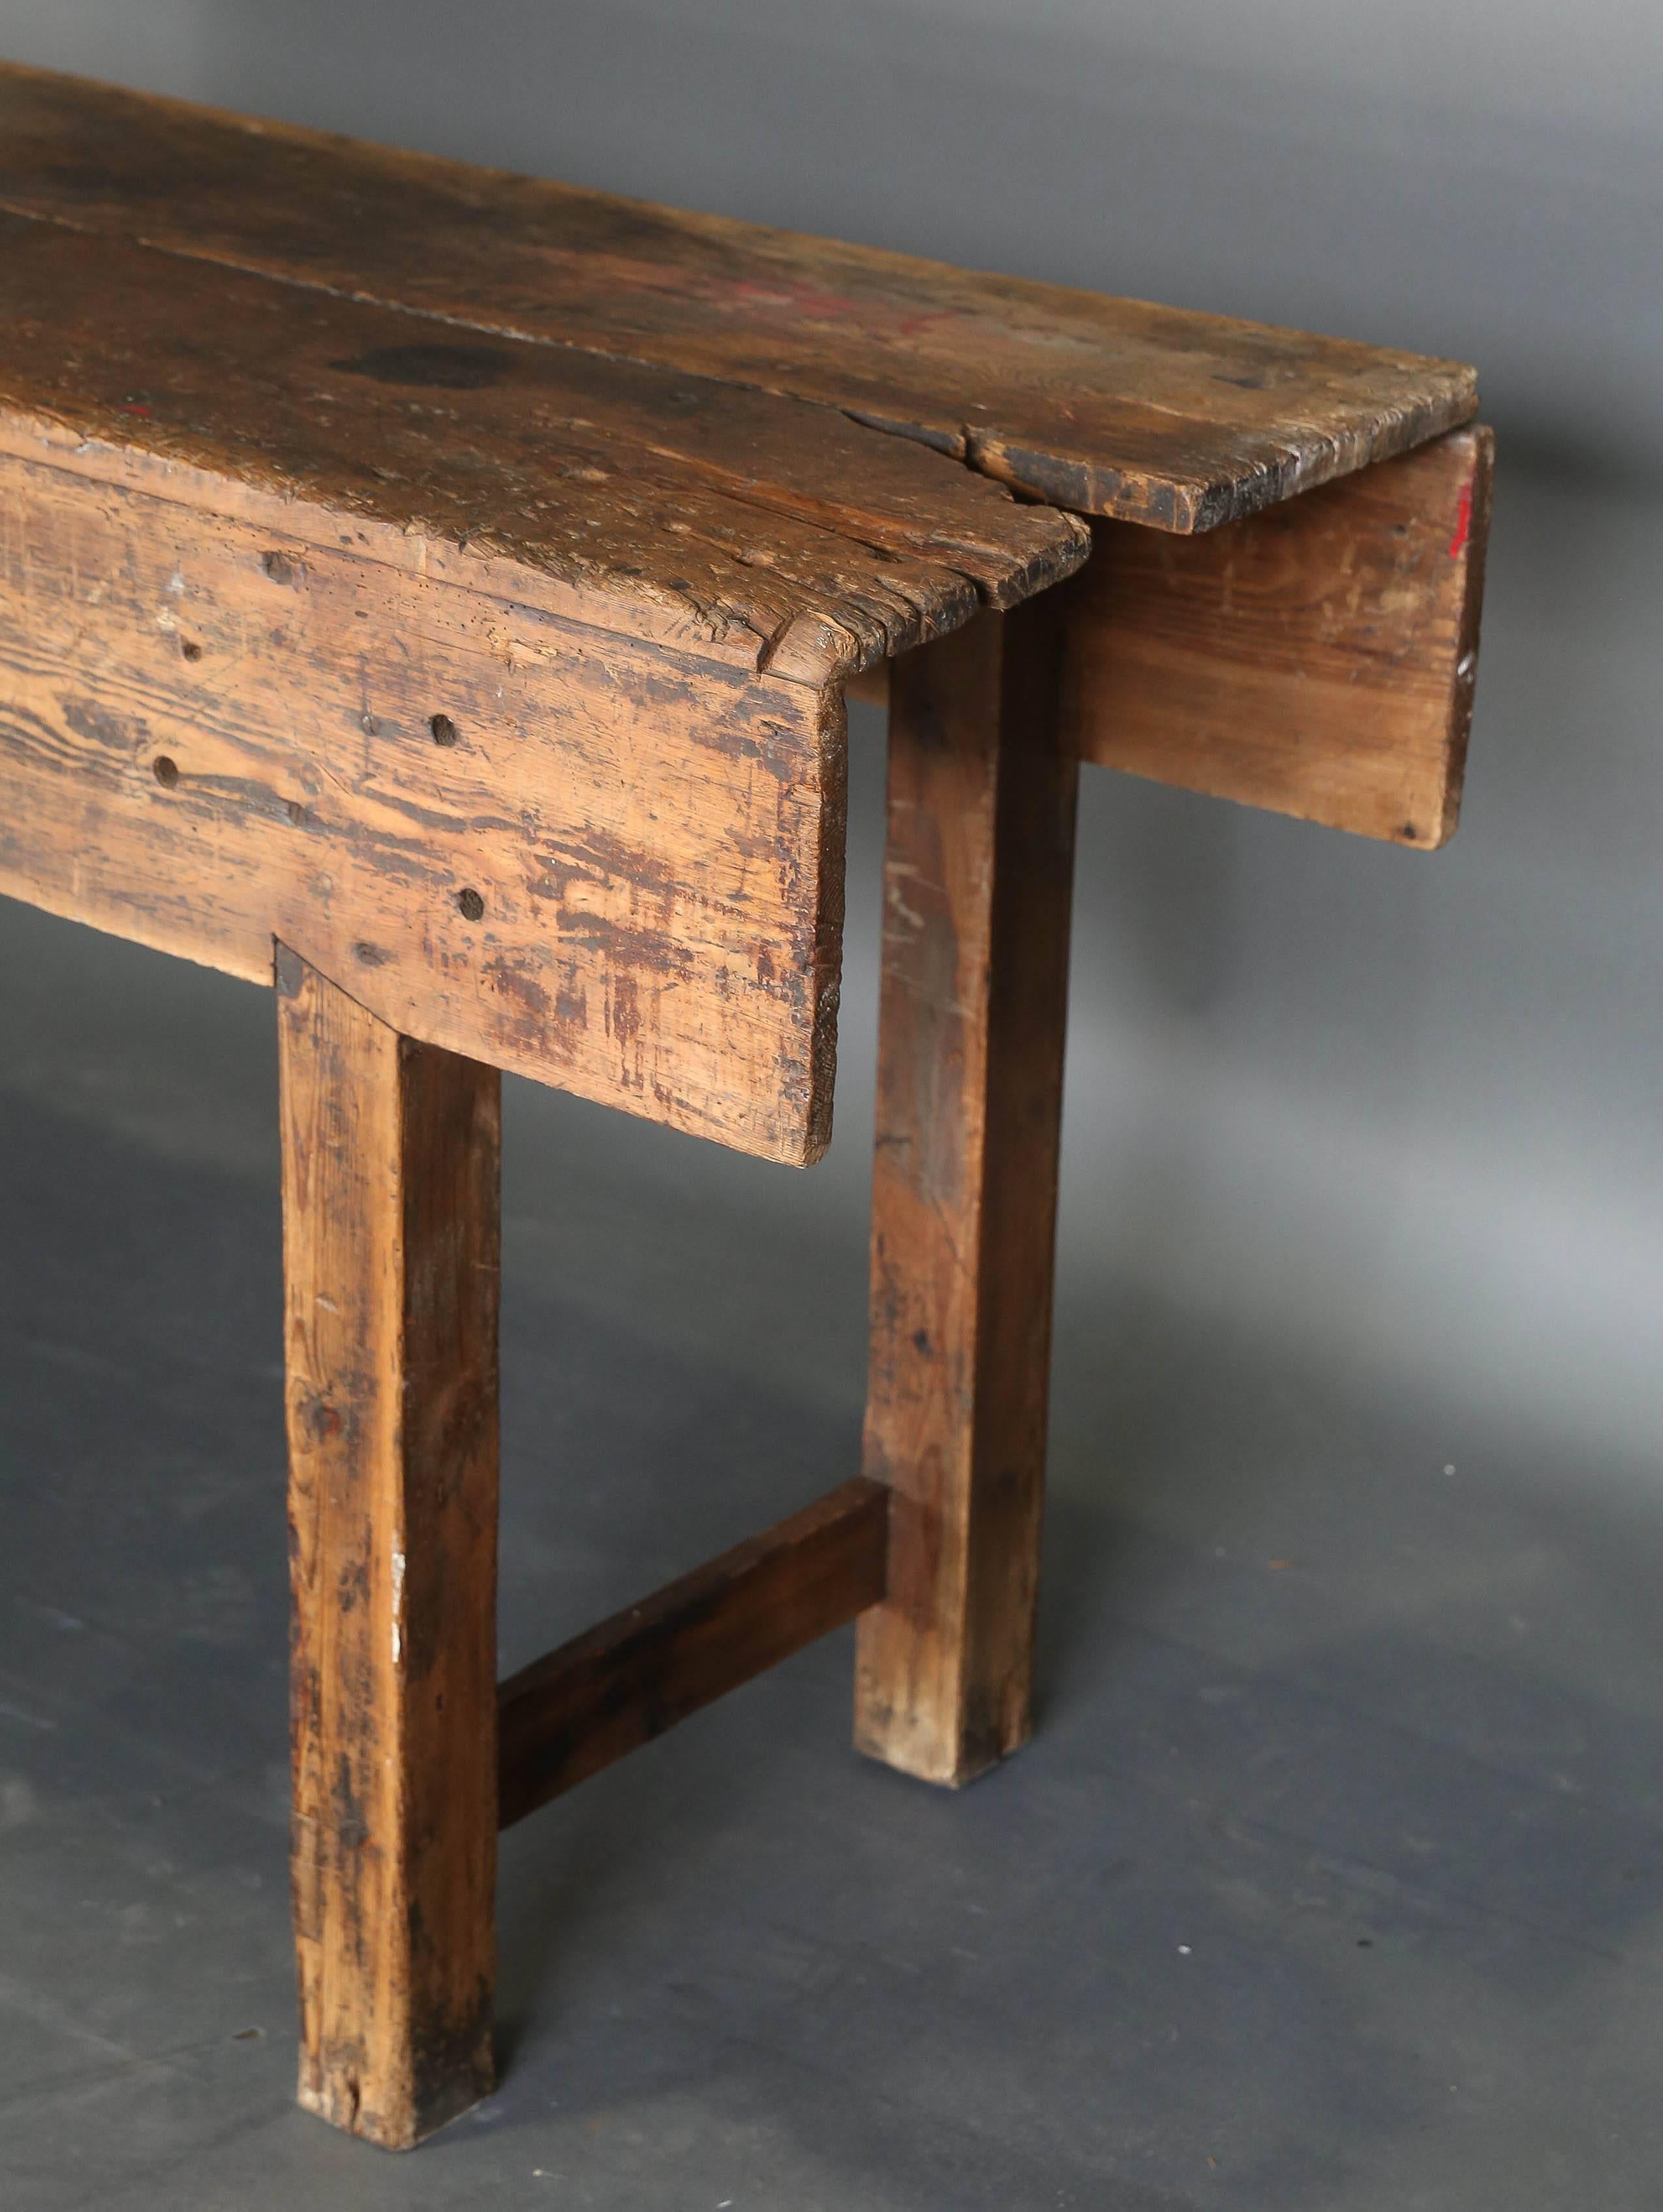 19th century French workbench with original vise. On right side of table a knot in the wood created the missing piece but does not detract from the workbench.